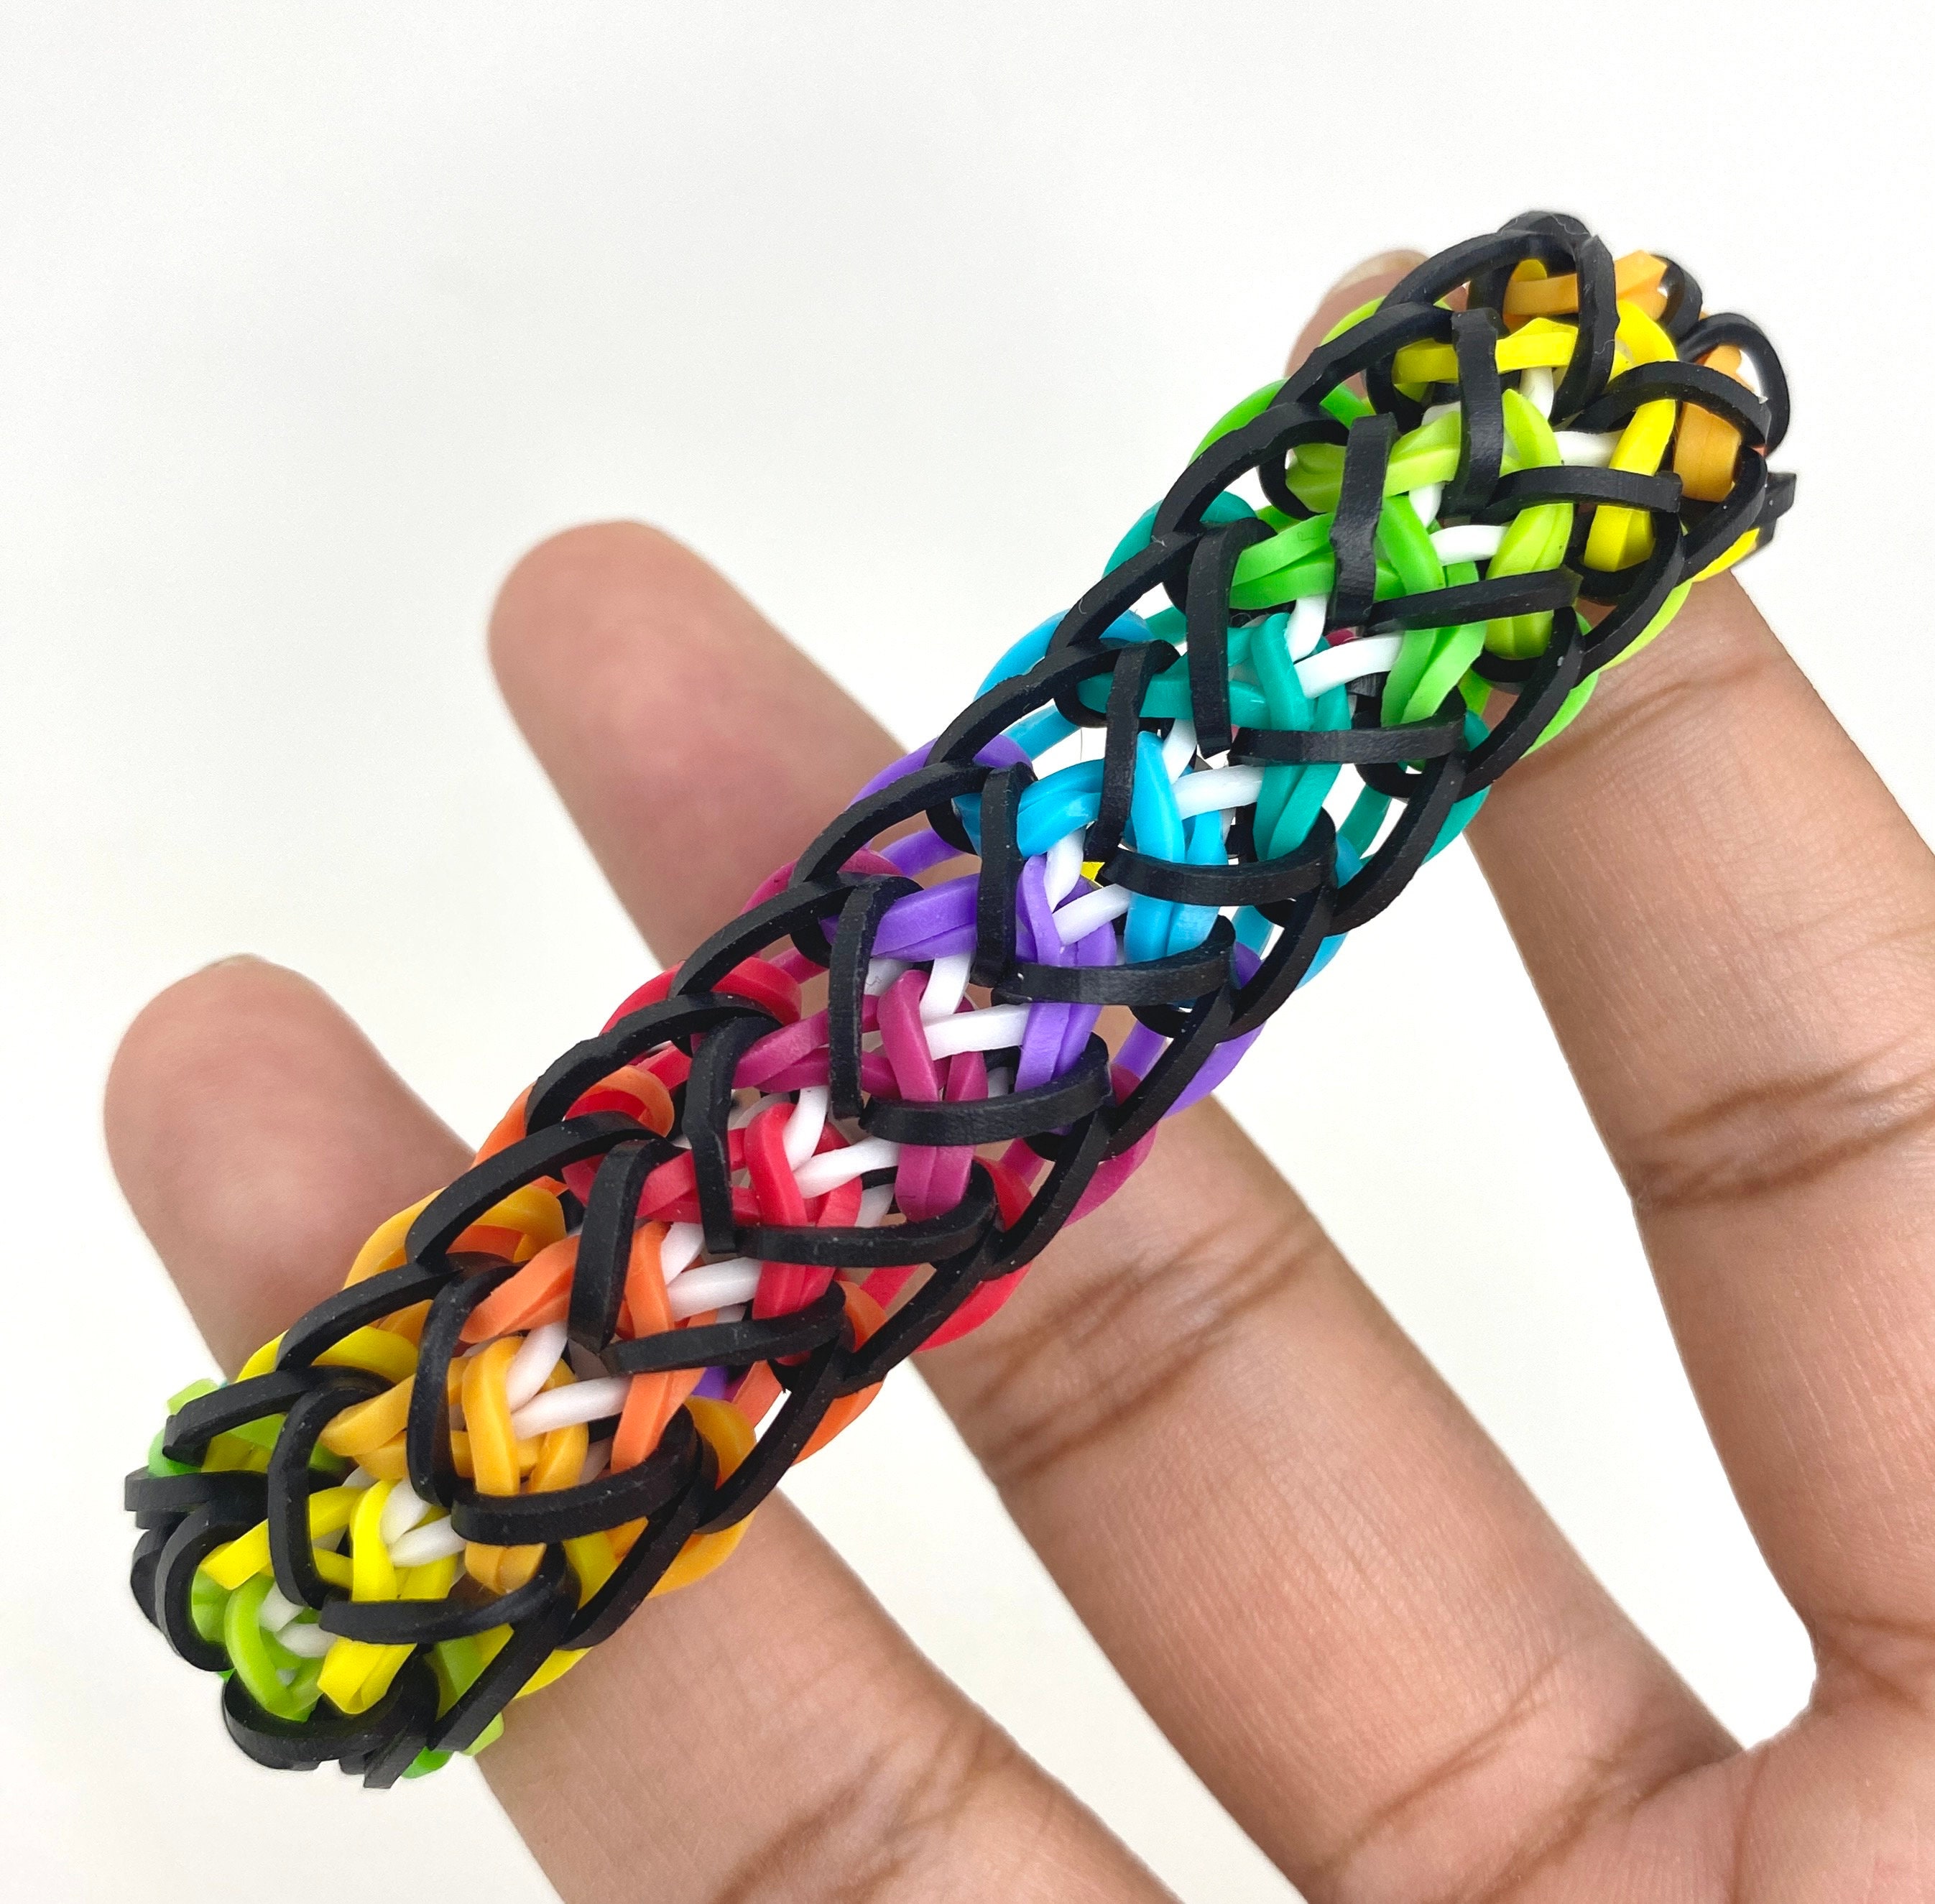 KABEER ART Color DIY Loom Band Kit with 4200 Colorful Rubber Bands for  Making Bracelets, Key Chains, Necklaces Etc(Multi) : Amazon.in: Toys & Games